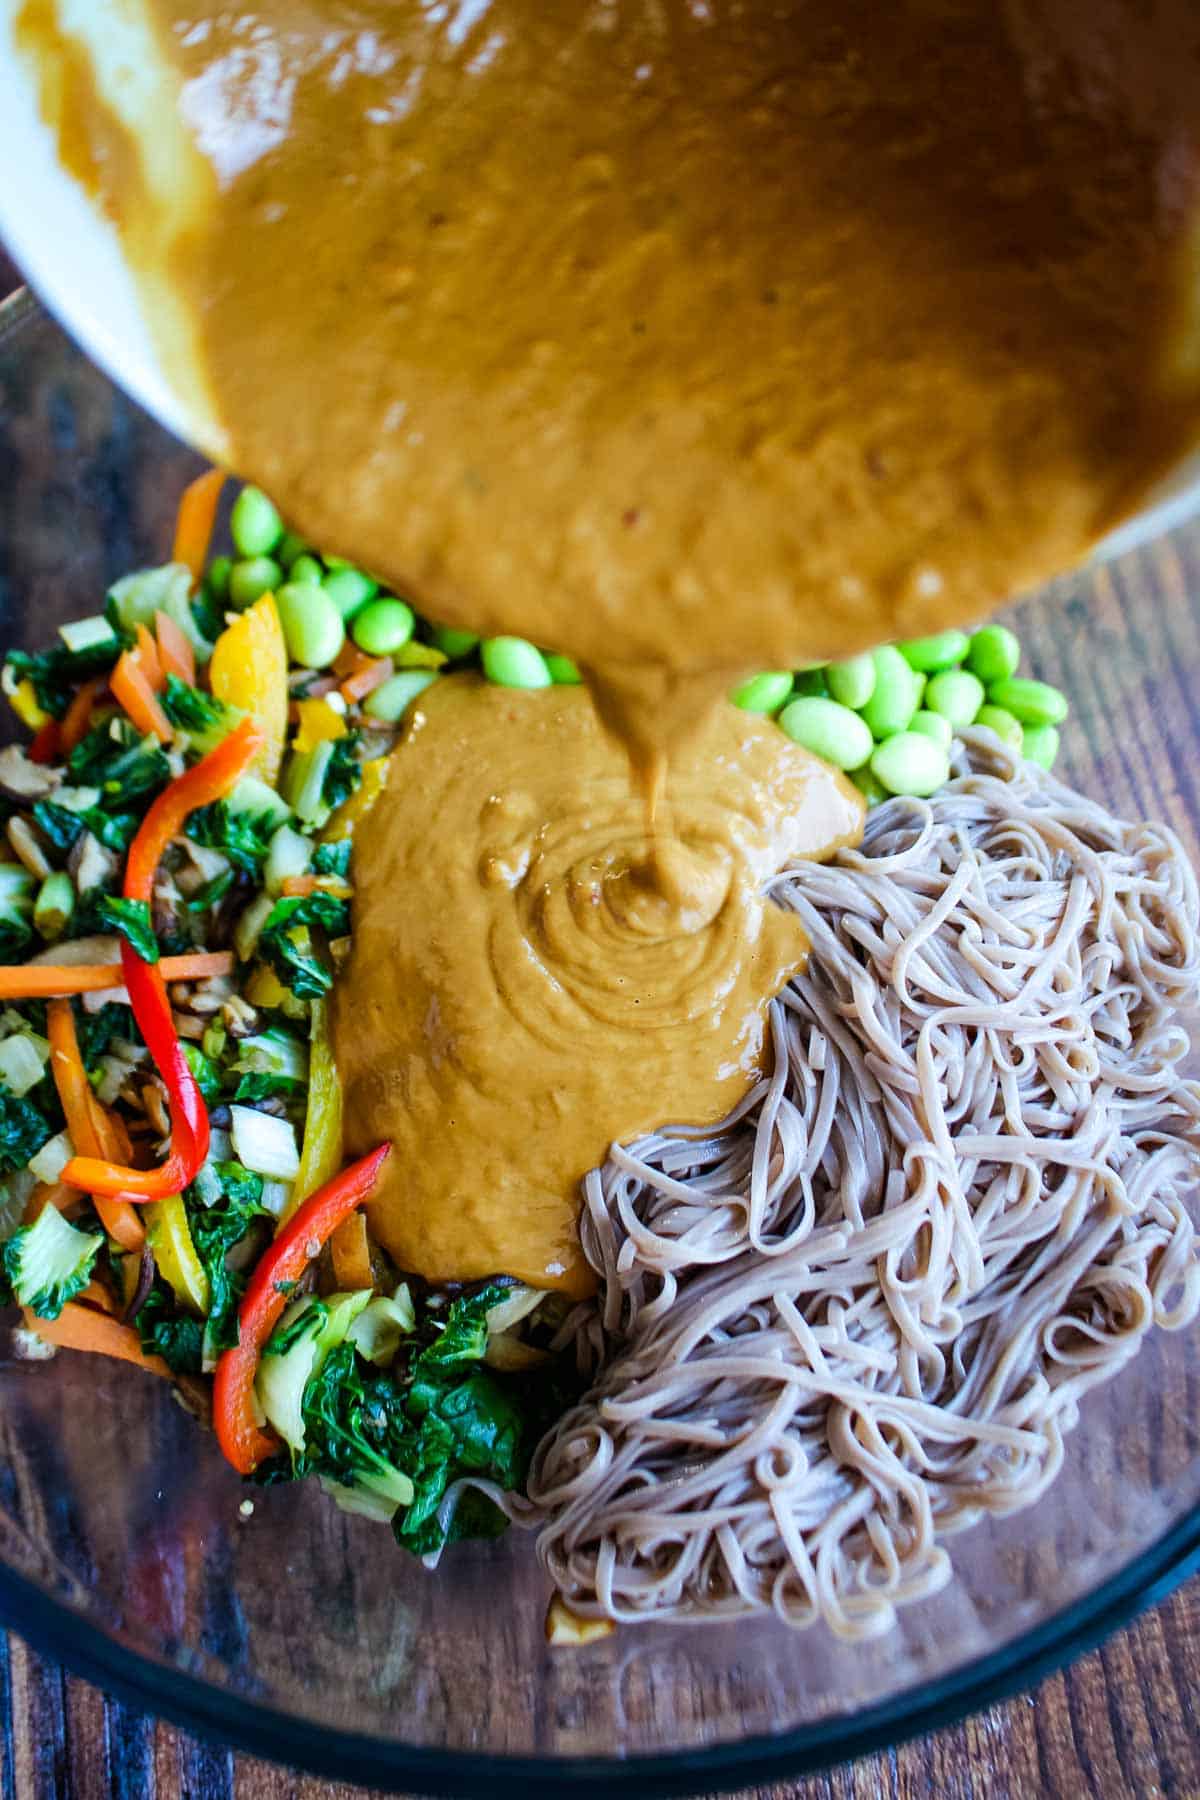 Adding peanut sauce to the noodles and veggies.